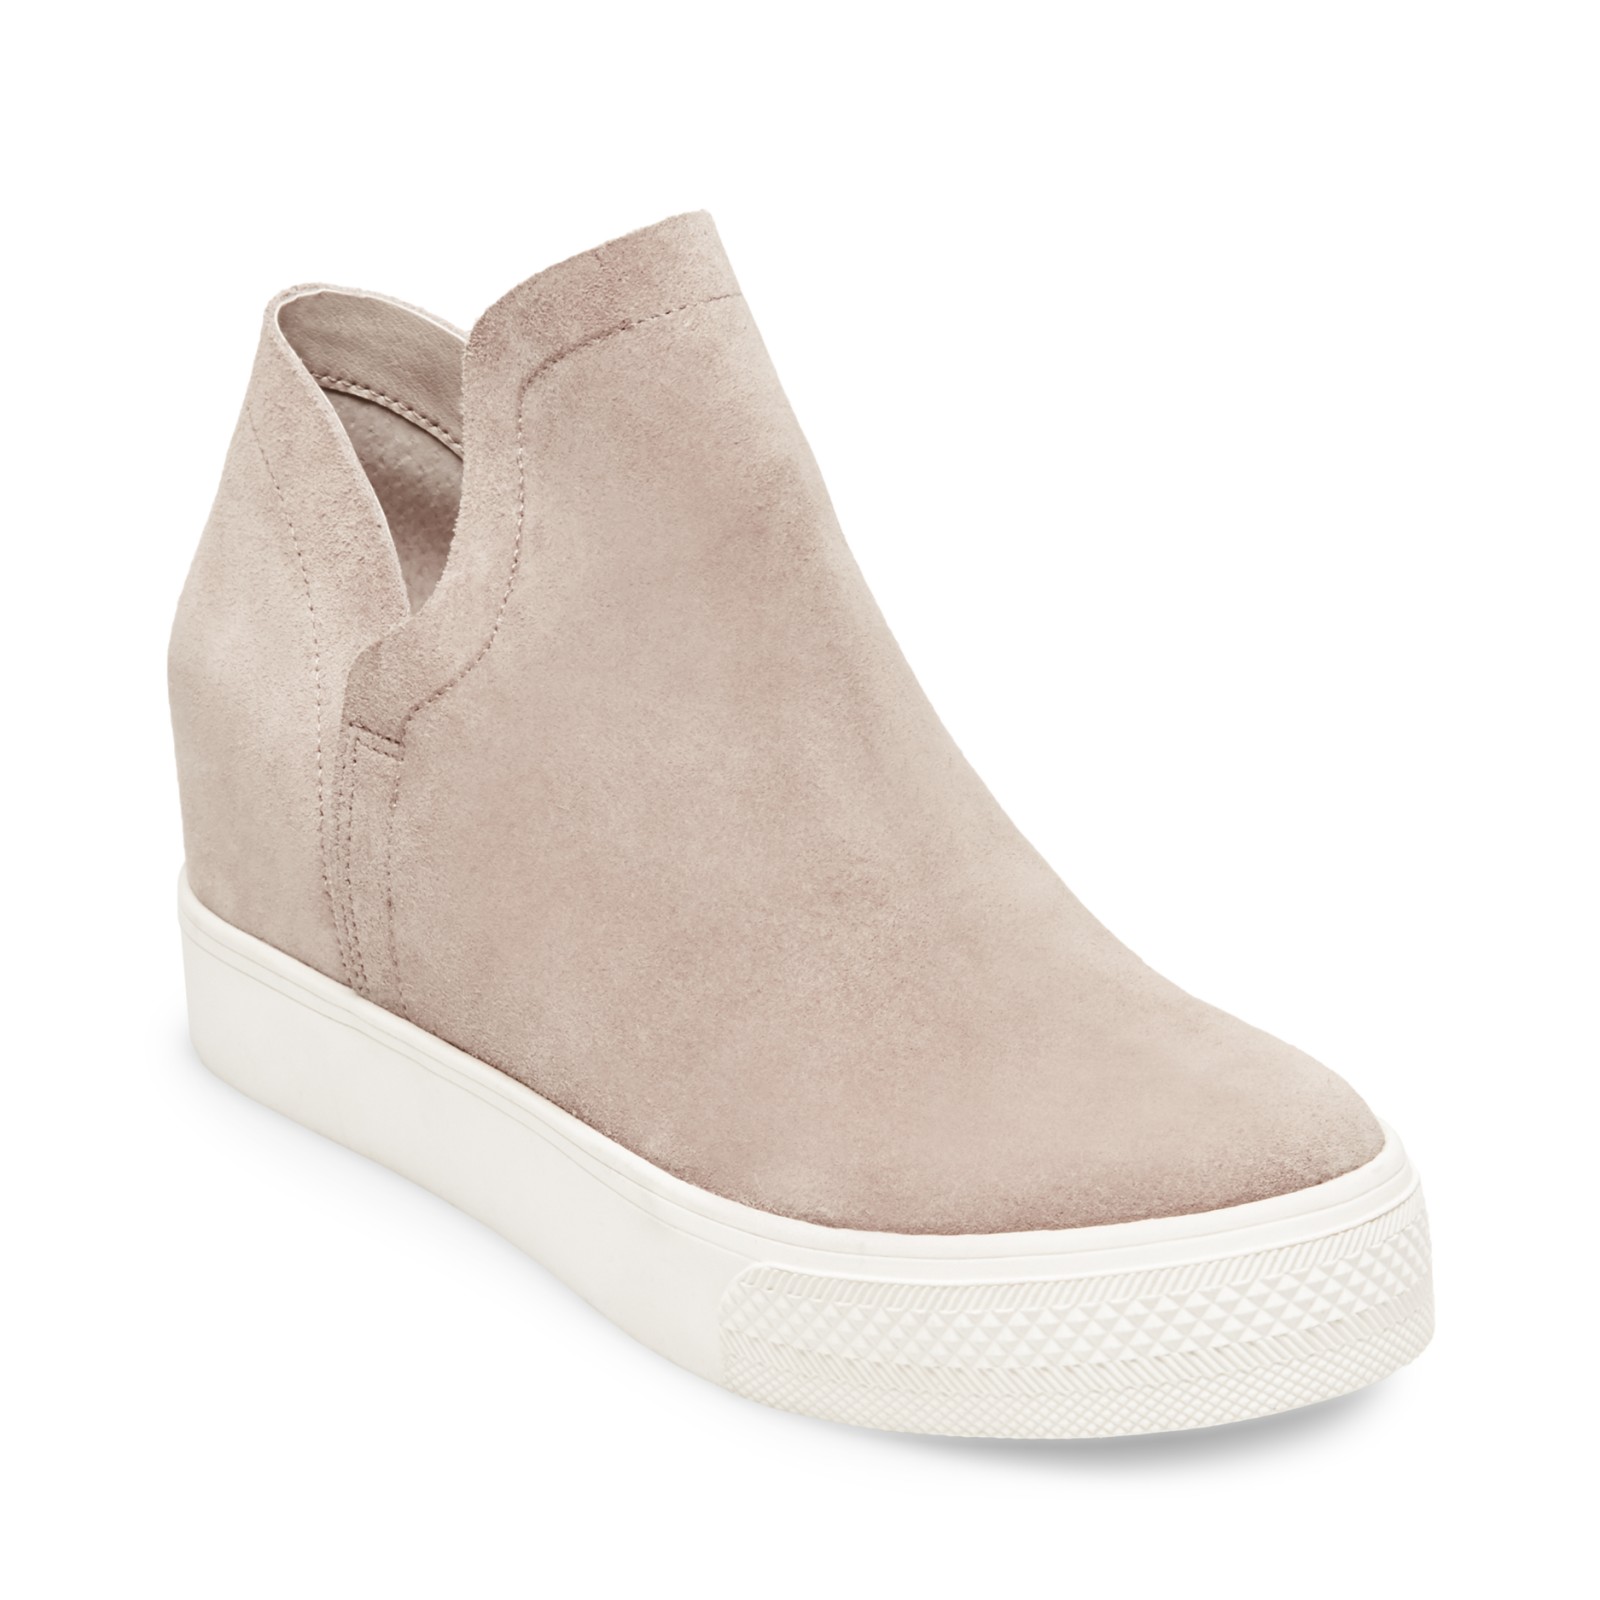 Steve Madden F19 WRANGLE taupe suede 